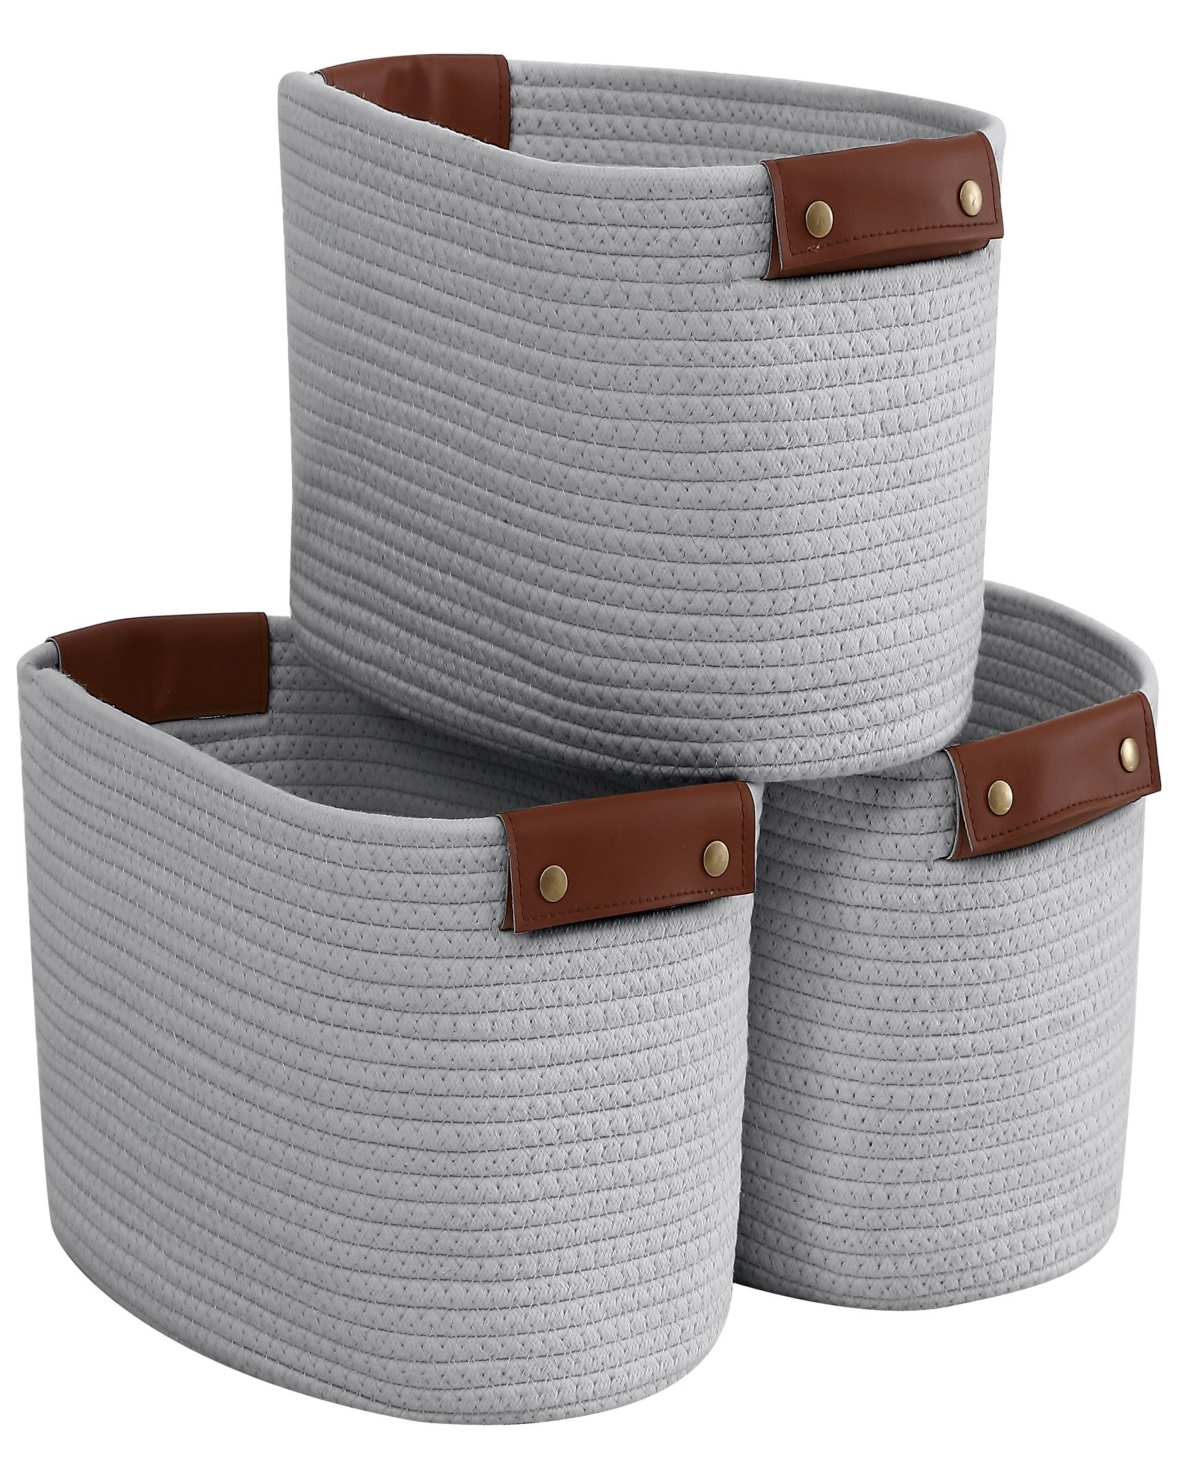 Ornavo Home 3 Pack Woven Cotton Rope Shelf Storage Basket With Leather Handles In Gray